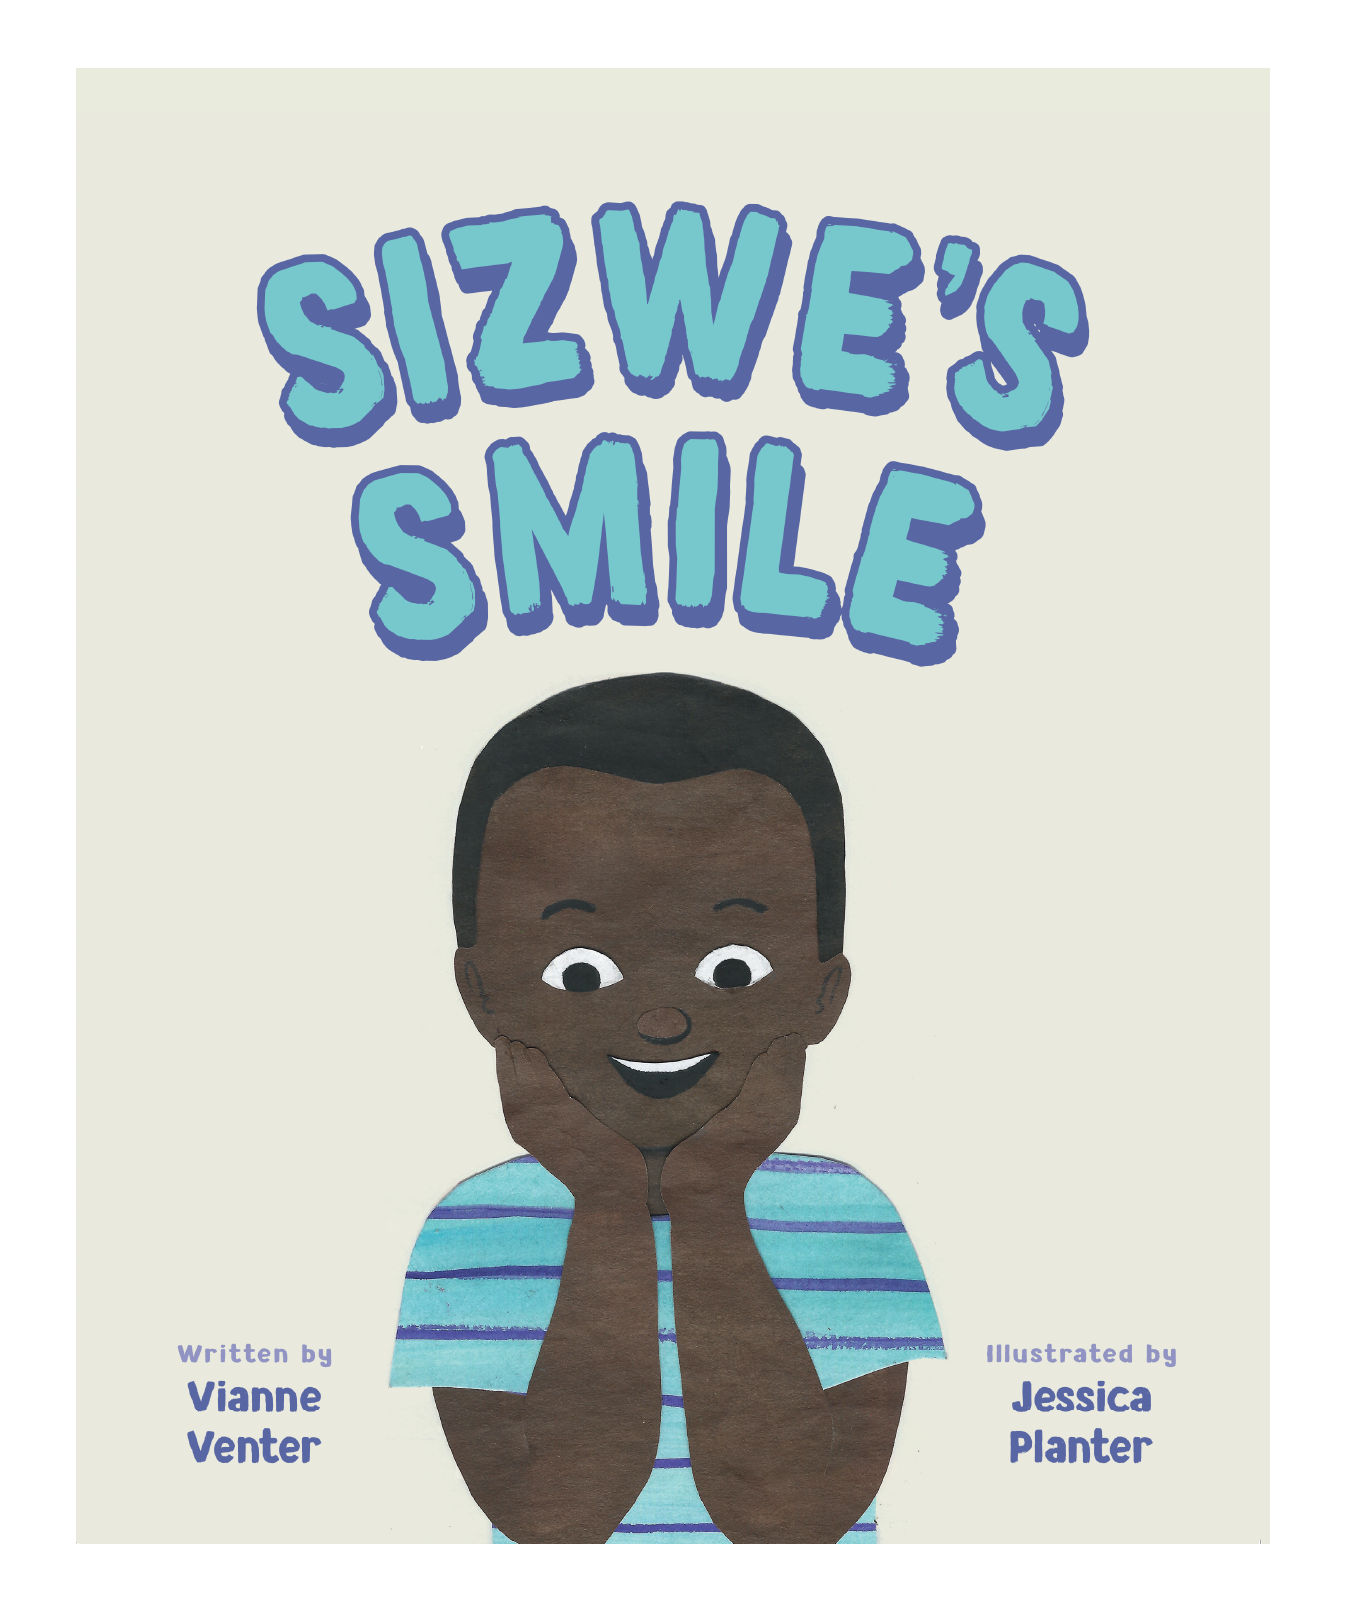 Sizwe's smile - Think Equal book cover